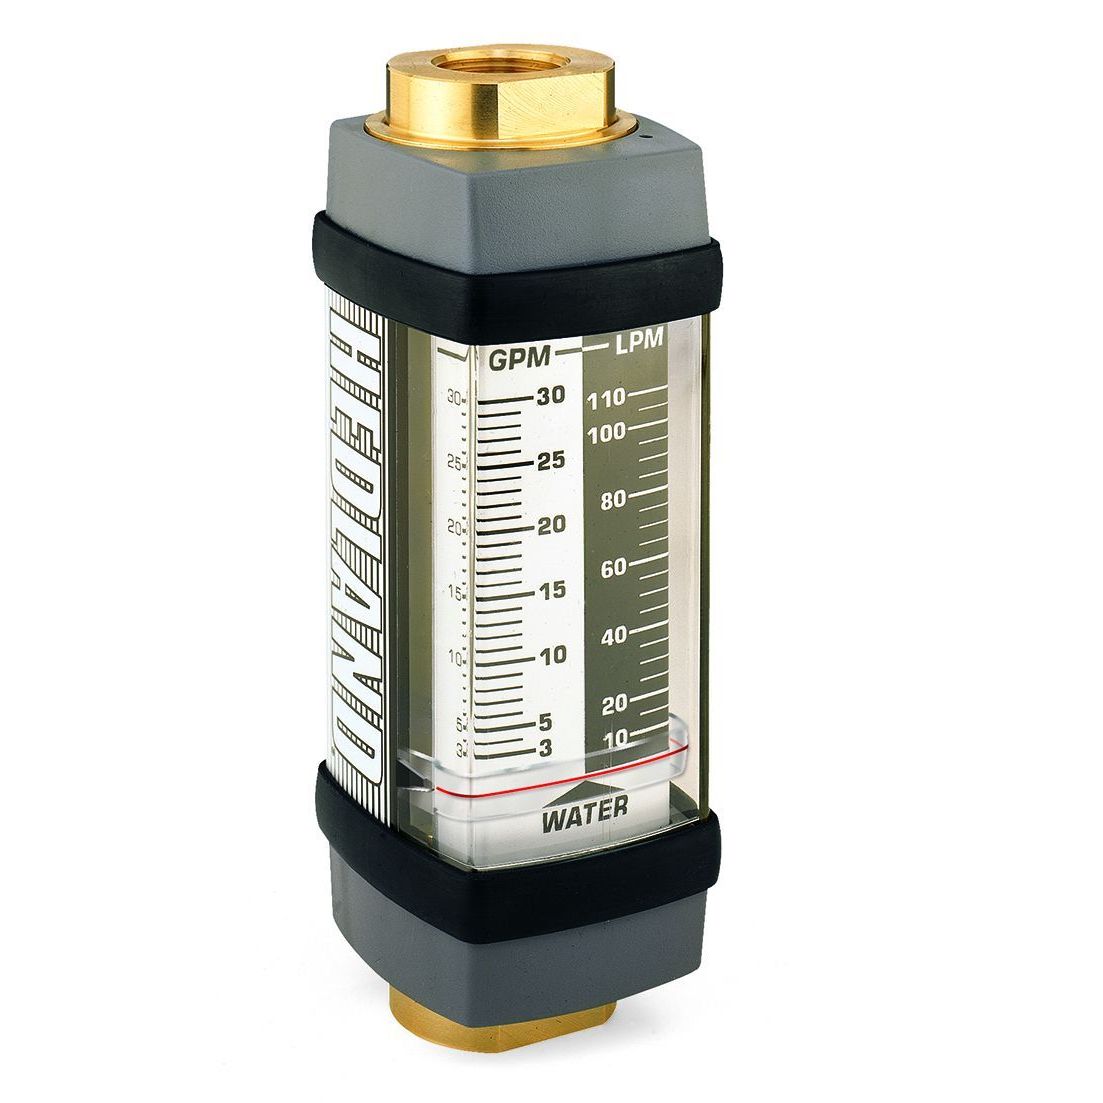 H805B-030 : Hedland 3500psi Brass Flow Meter for Water, 1.25 NPT, 3 to 30 GPM